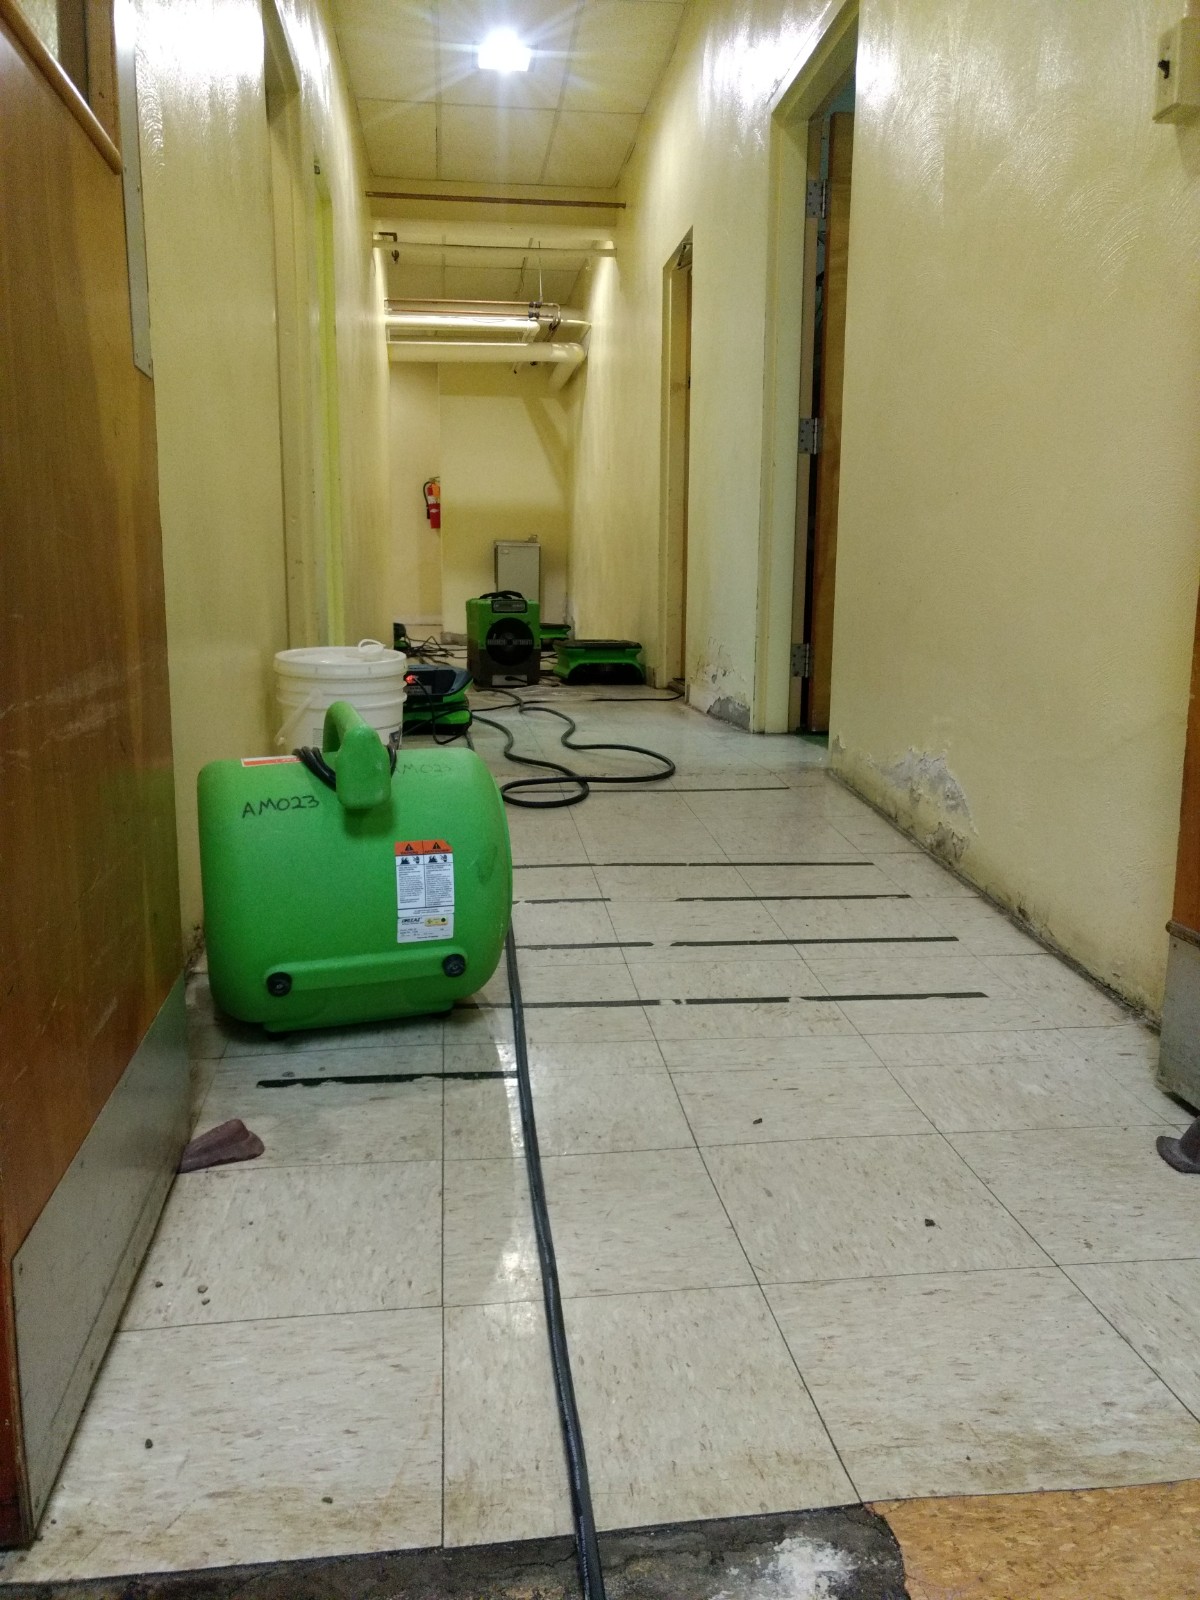 Responding to a commercial sewage loss.